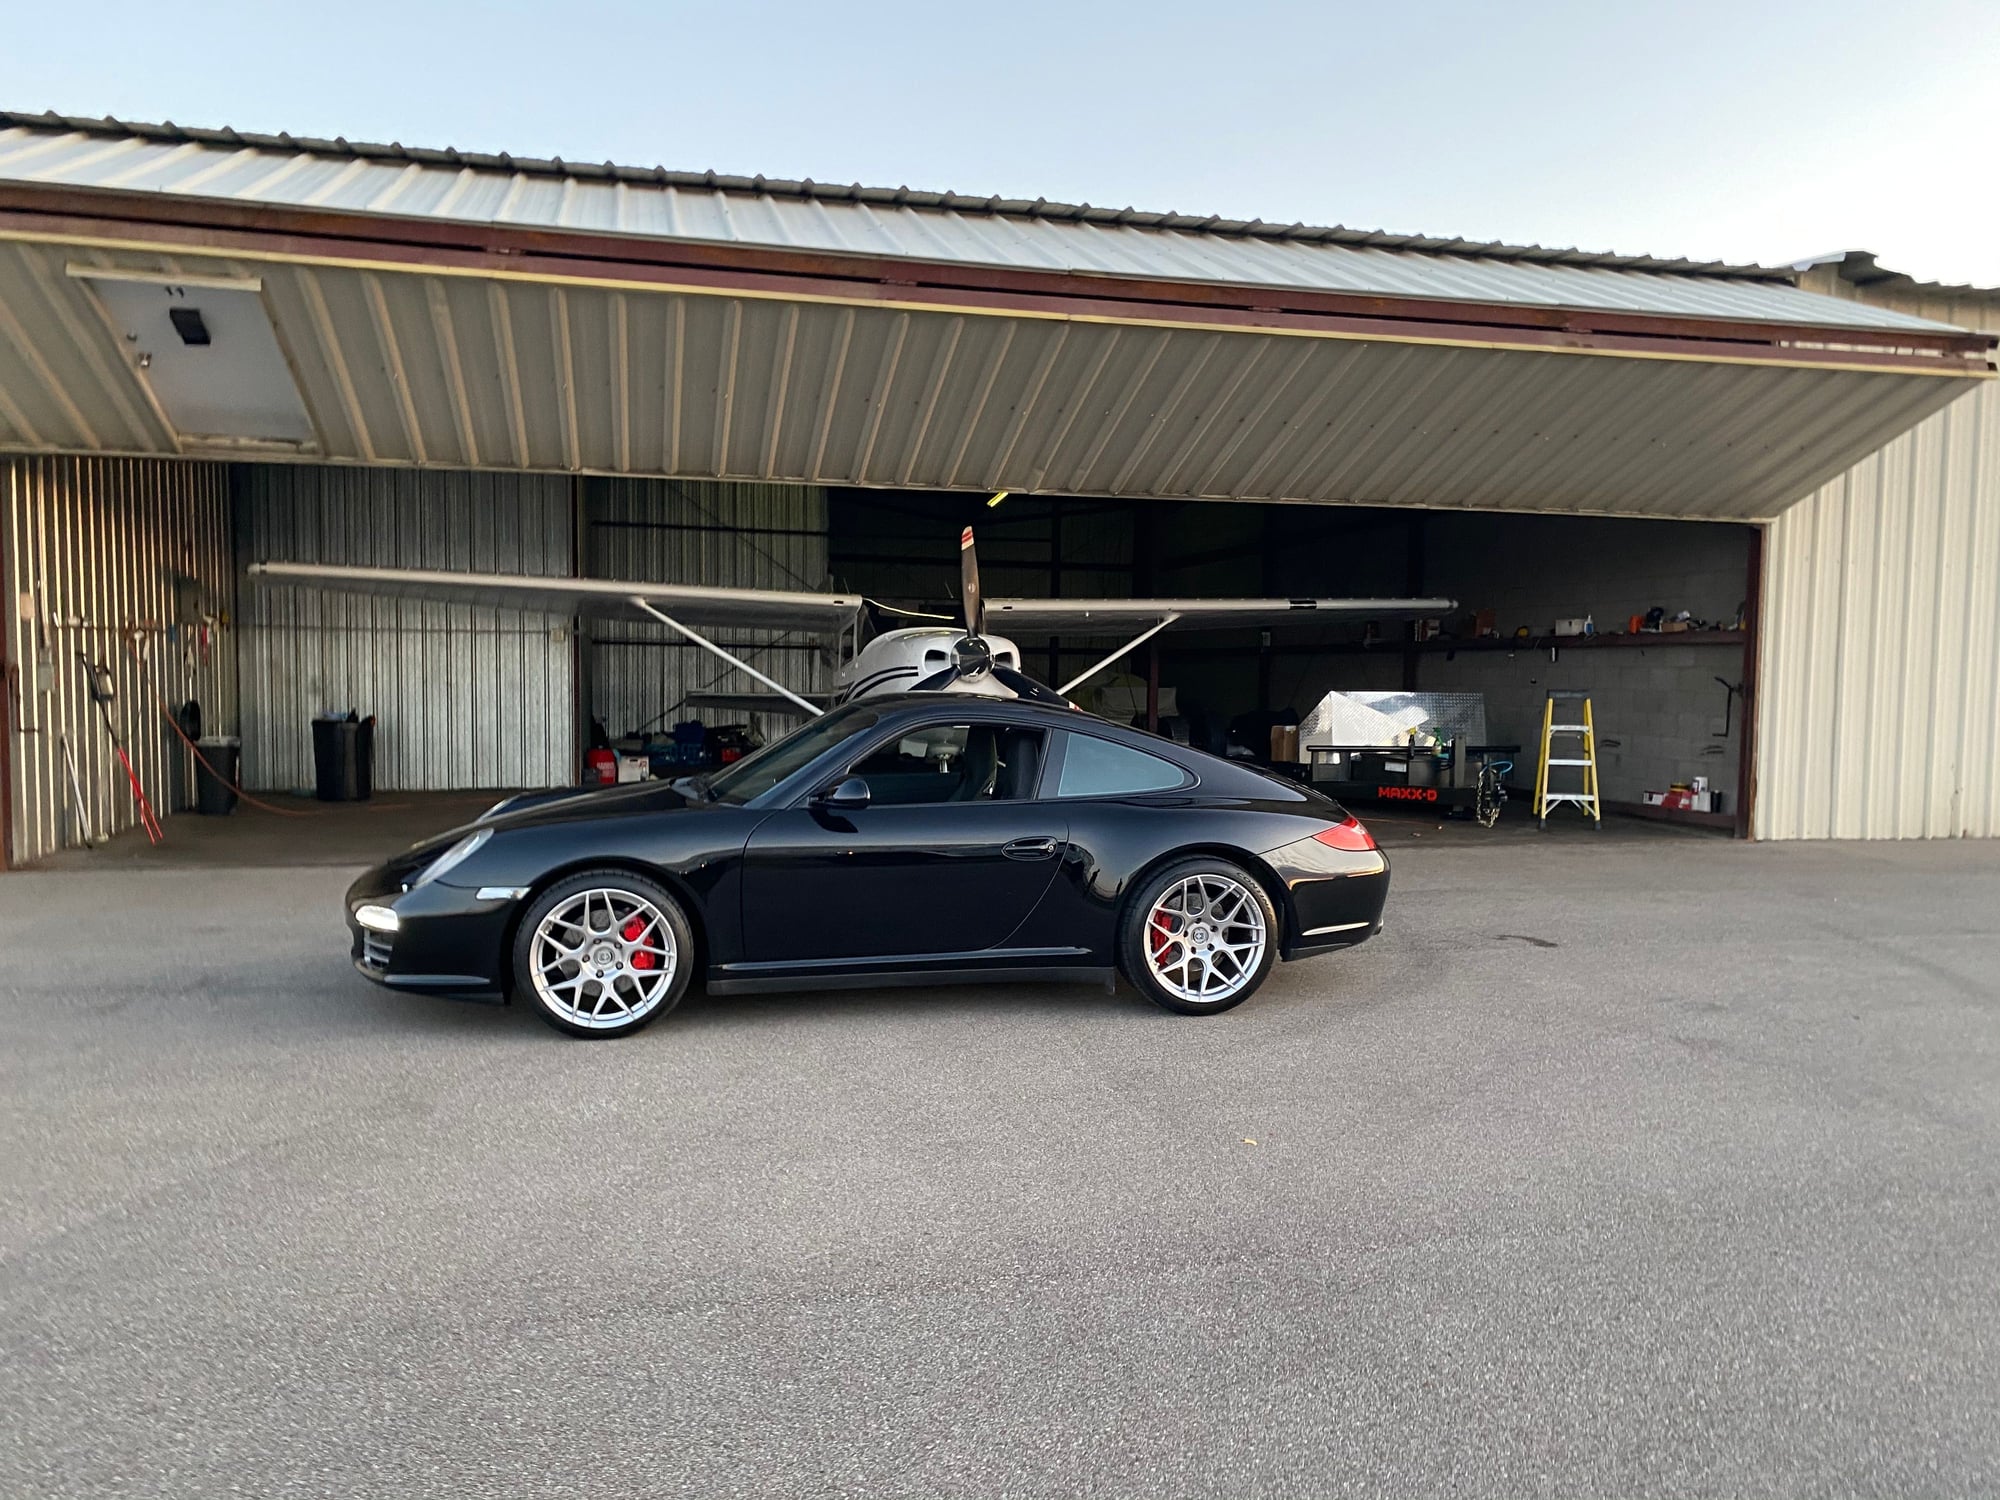 2010 Porsche 911 - 997.2 2010 Porsche 911 C4S 6 speed manual naturally aspirated turbo wide body - Used - VIN 12345678912345678 - 55,000 Miles - 6 cyl - AWD - Manual - Coupe - Black - Louisville, KY 40204, United States